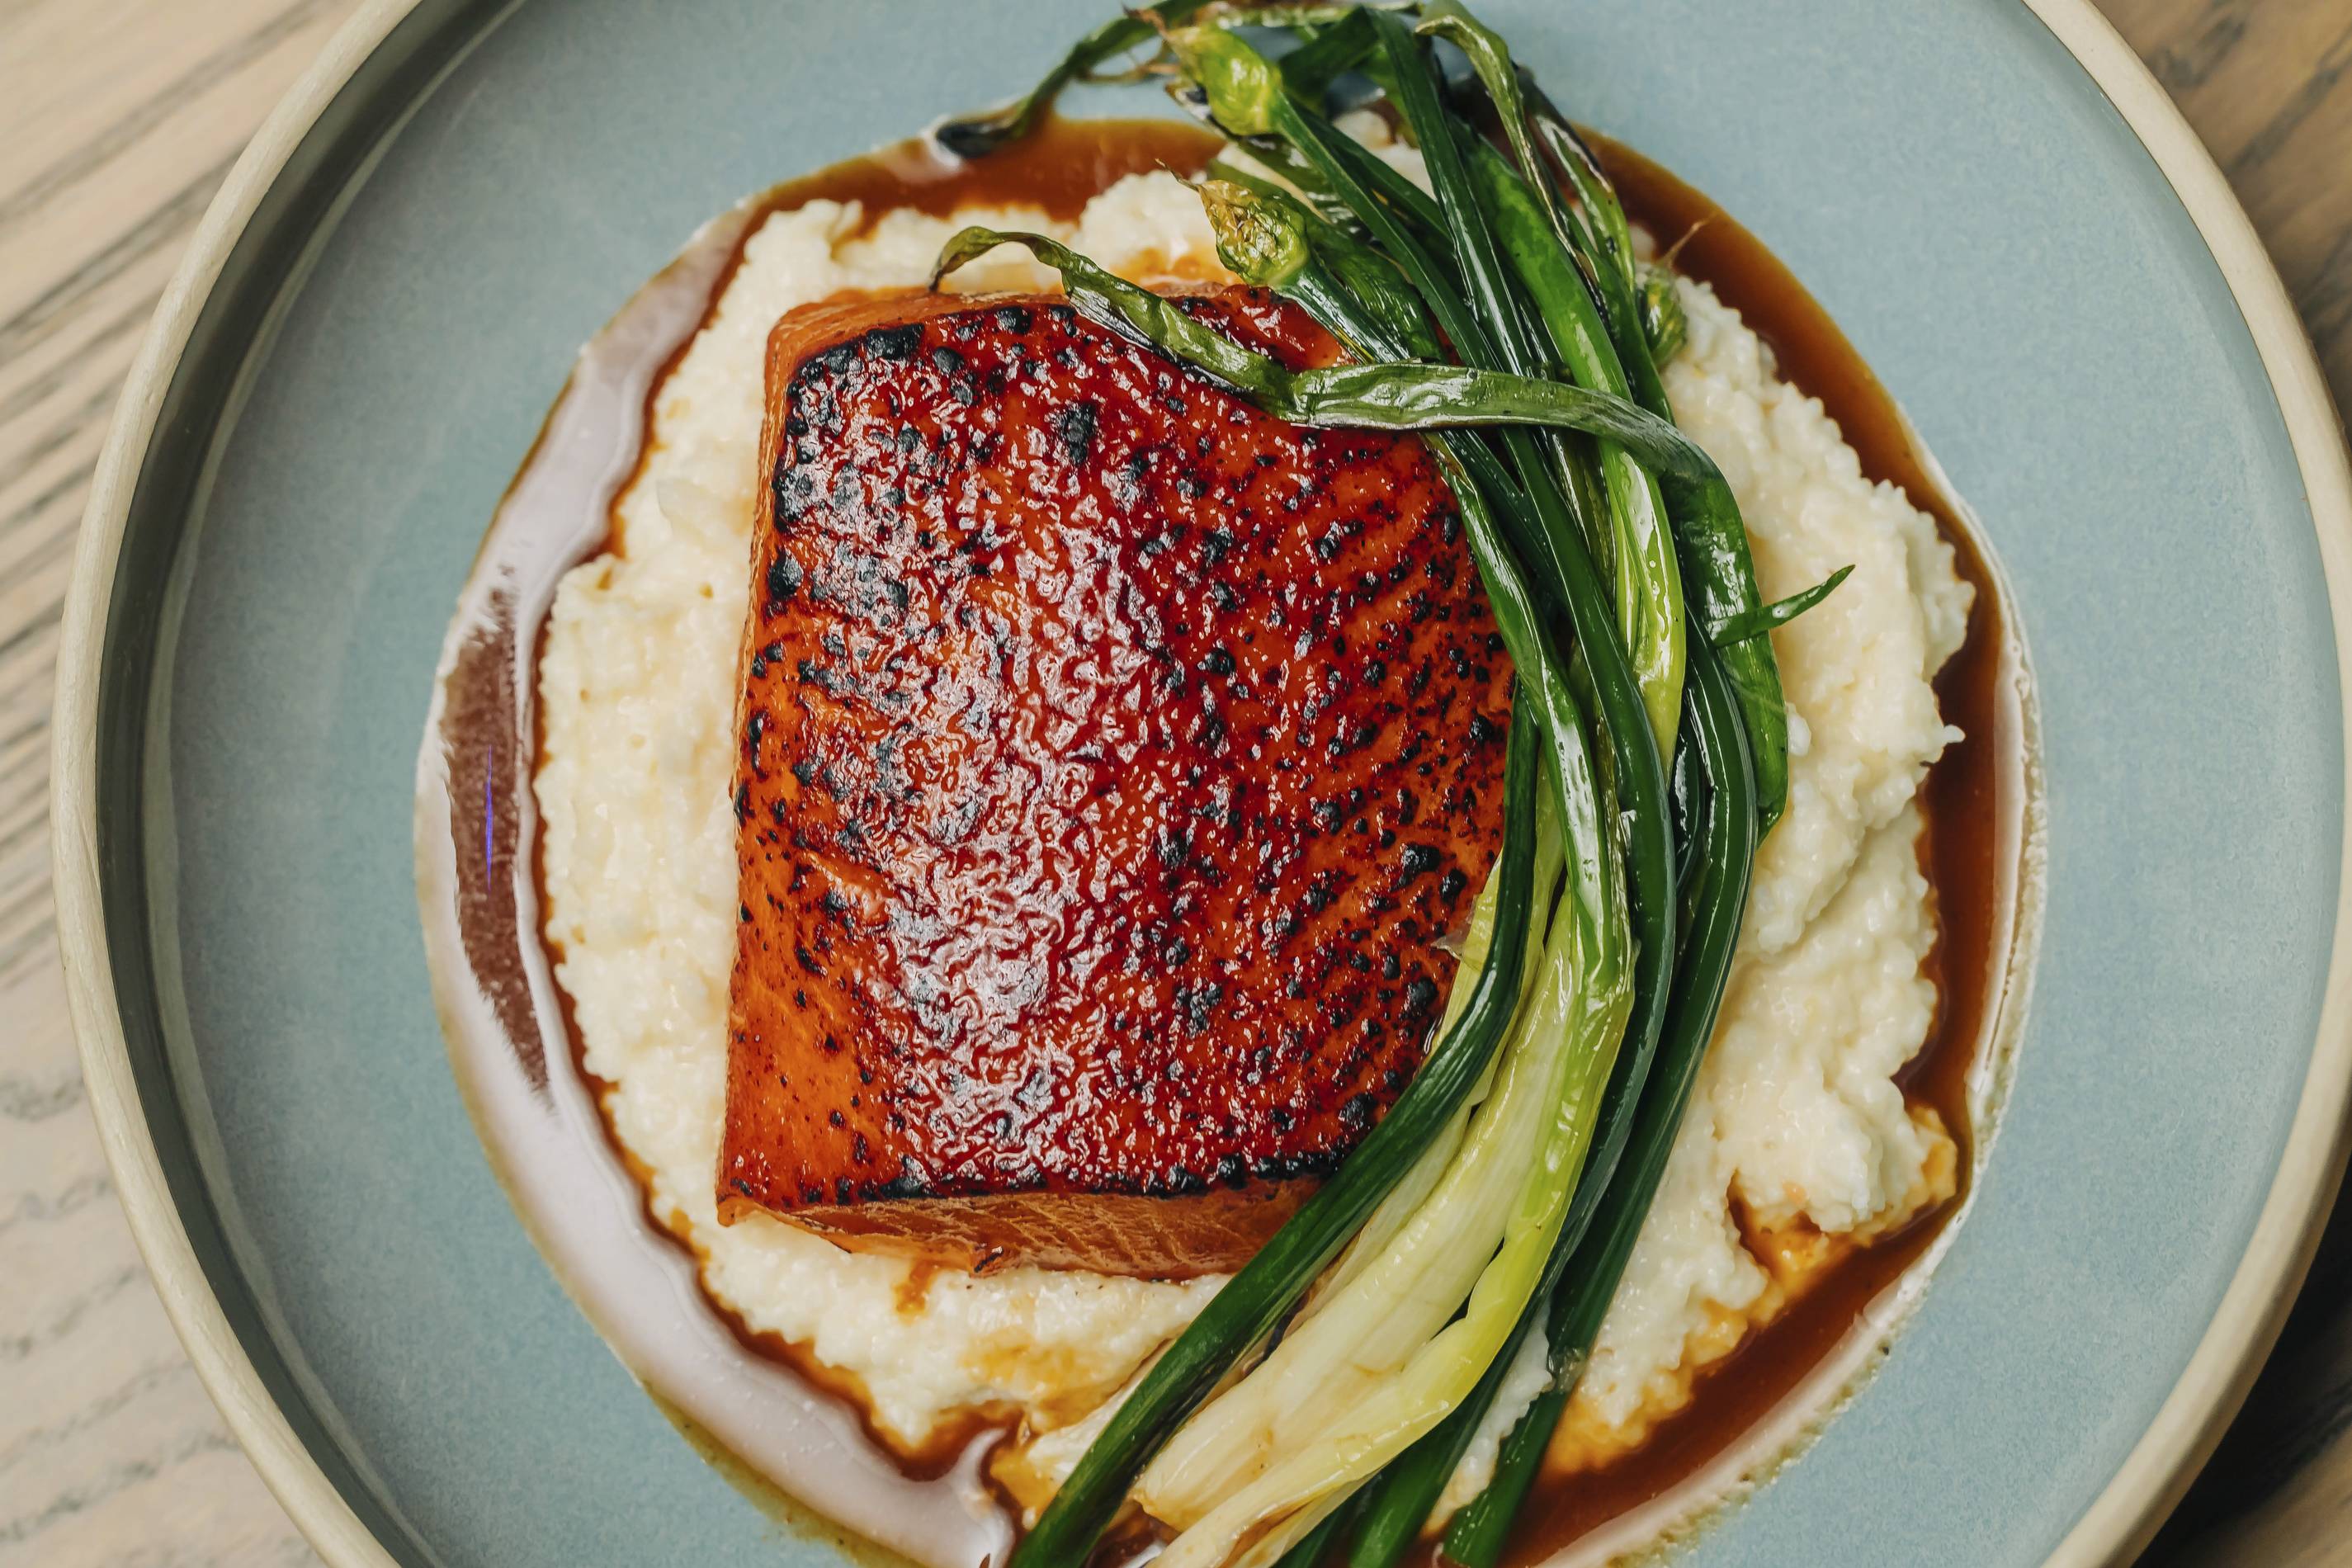 BBQ salmon with cheesy grits from the oakville in chicago